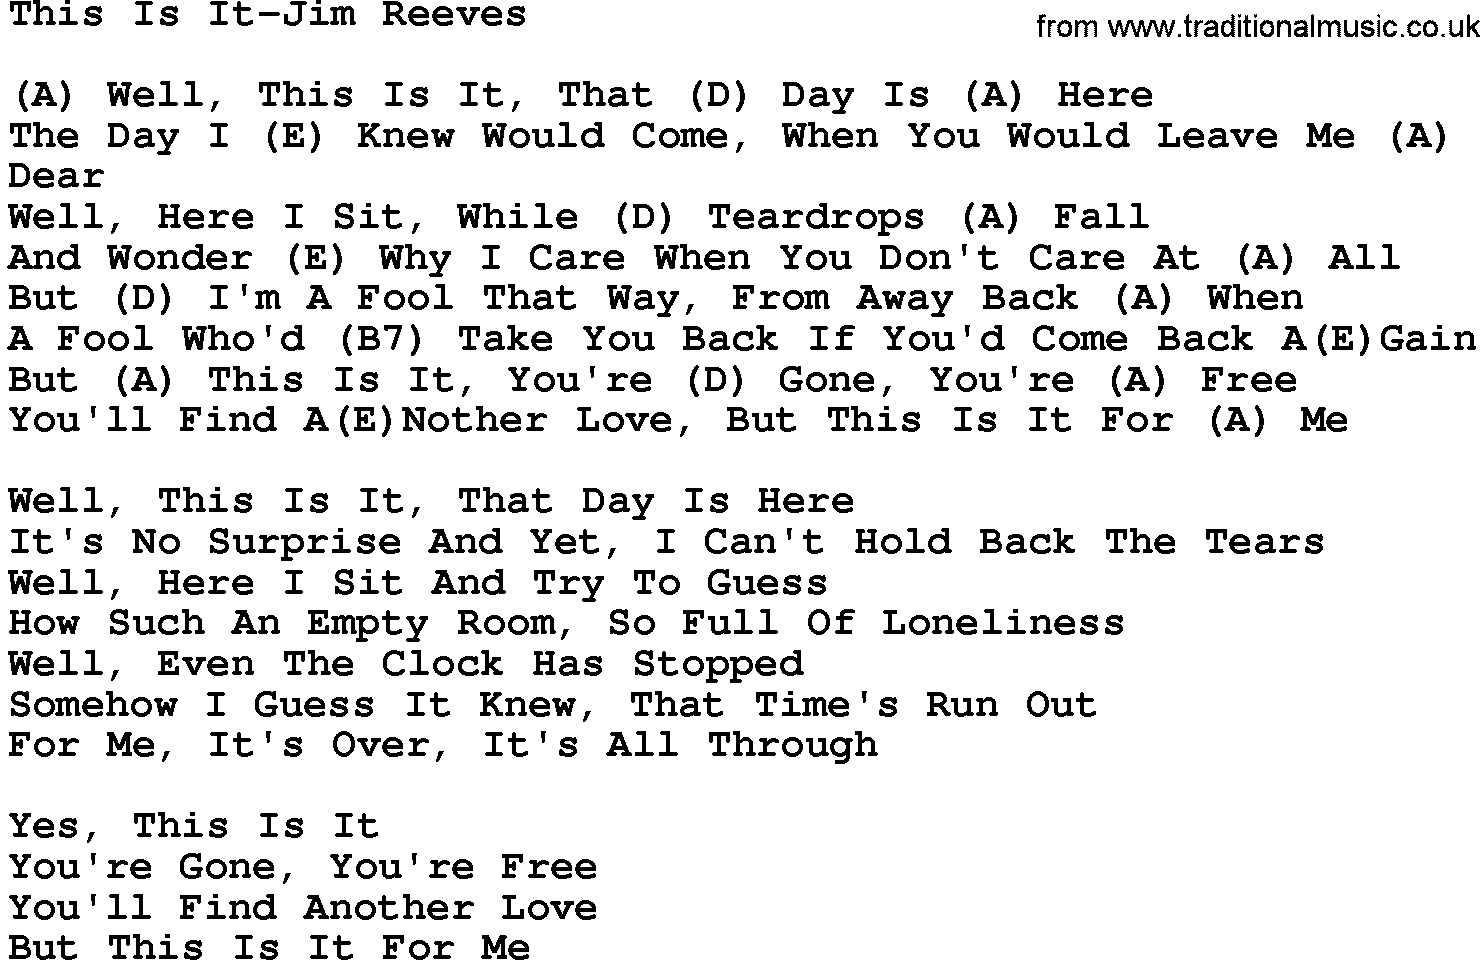 Country music song: This Is It-Jim Reeves lyrics and chords